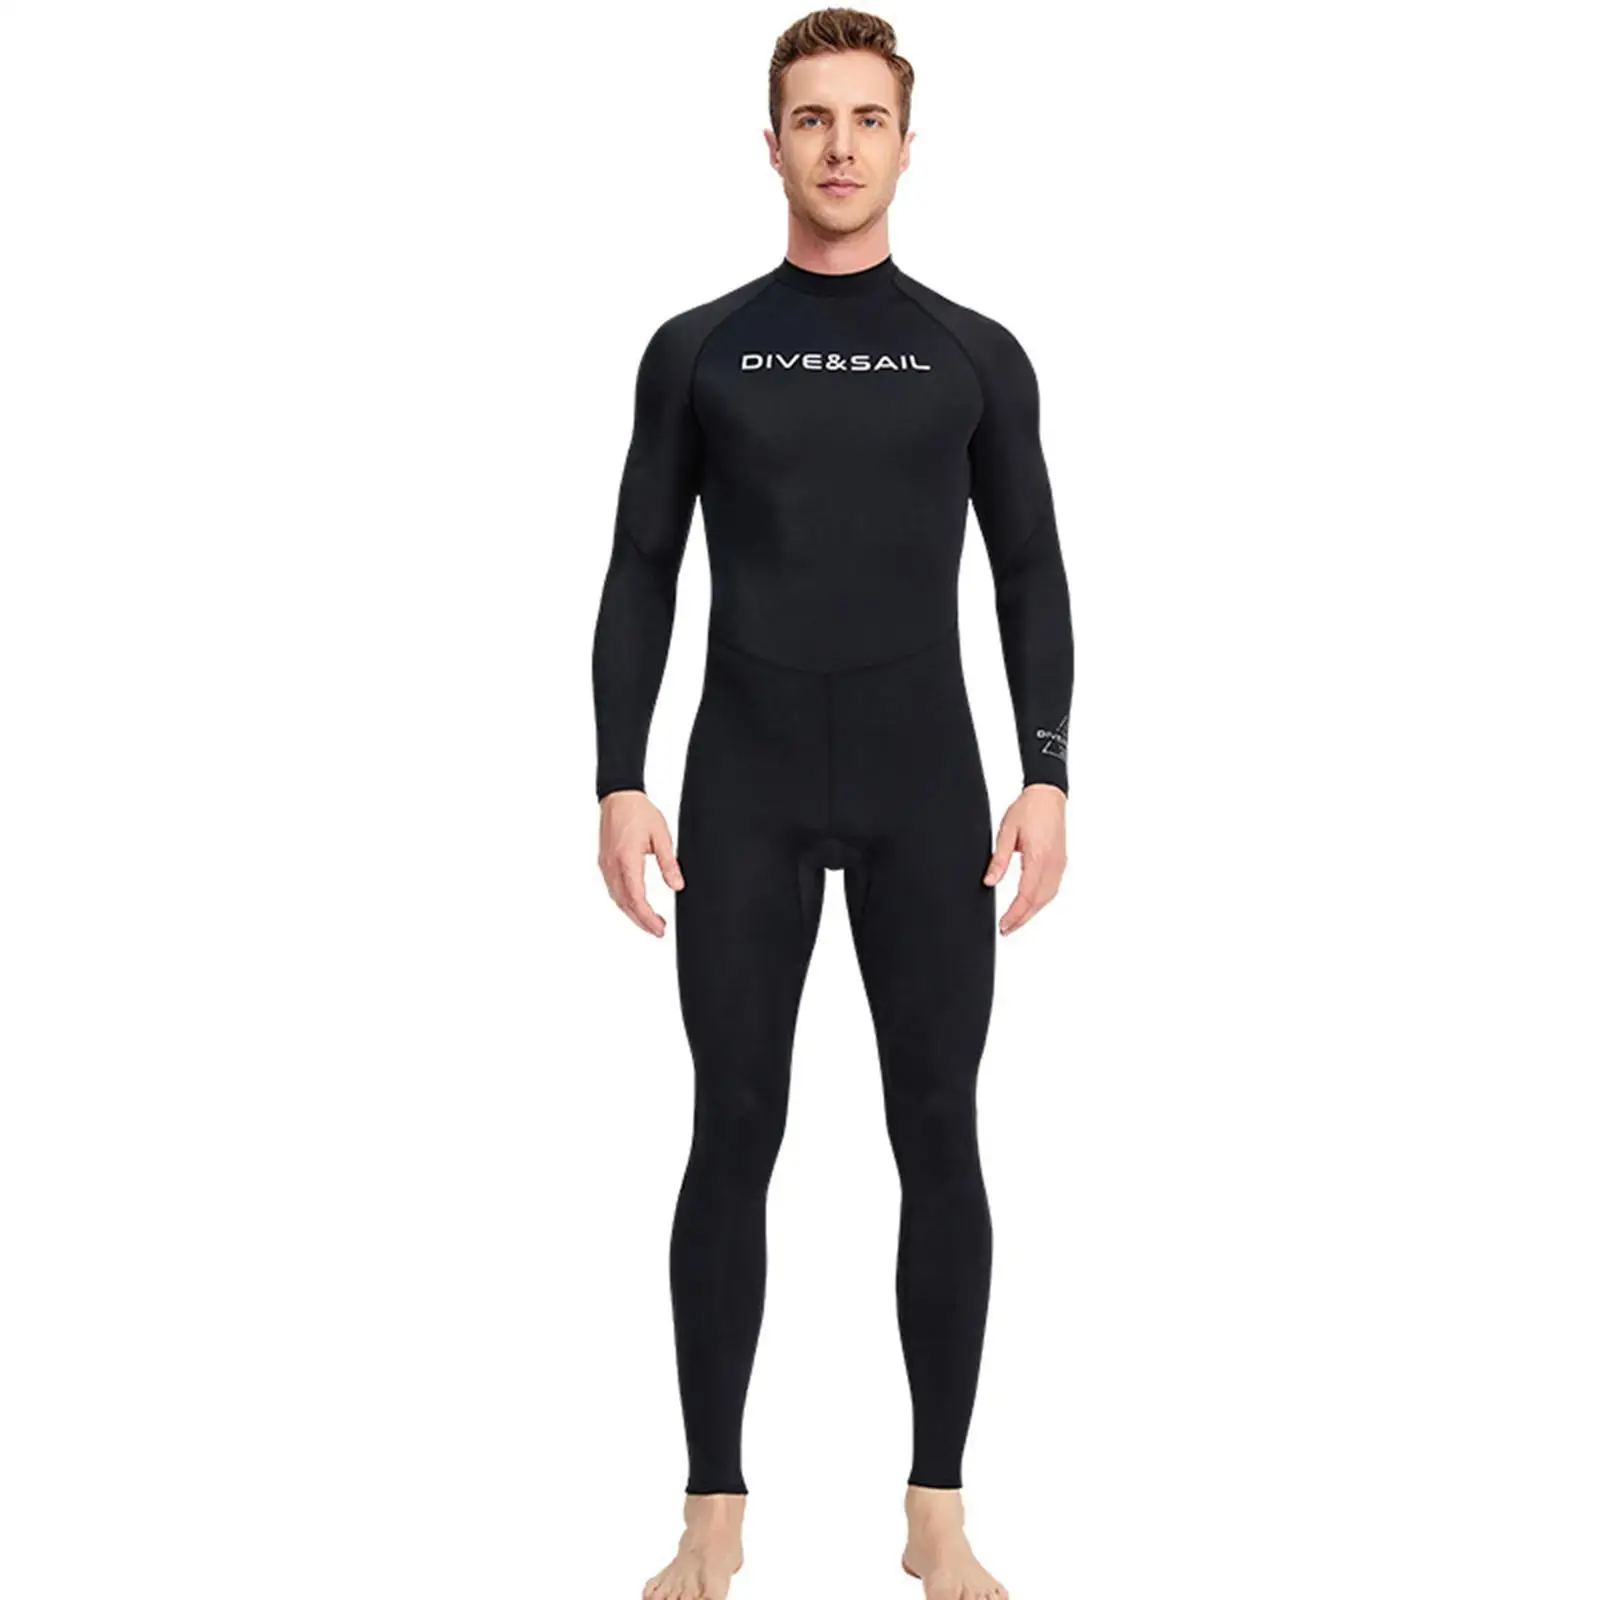 Super Stretch Diving Wetsuit Anti-Uv Swimming Surfing Kayaking for Water Sports